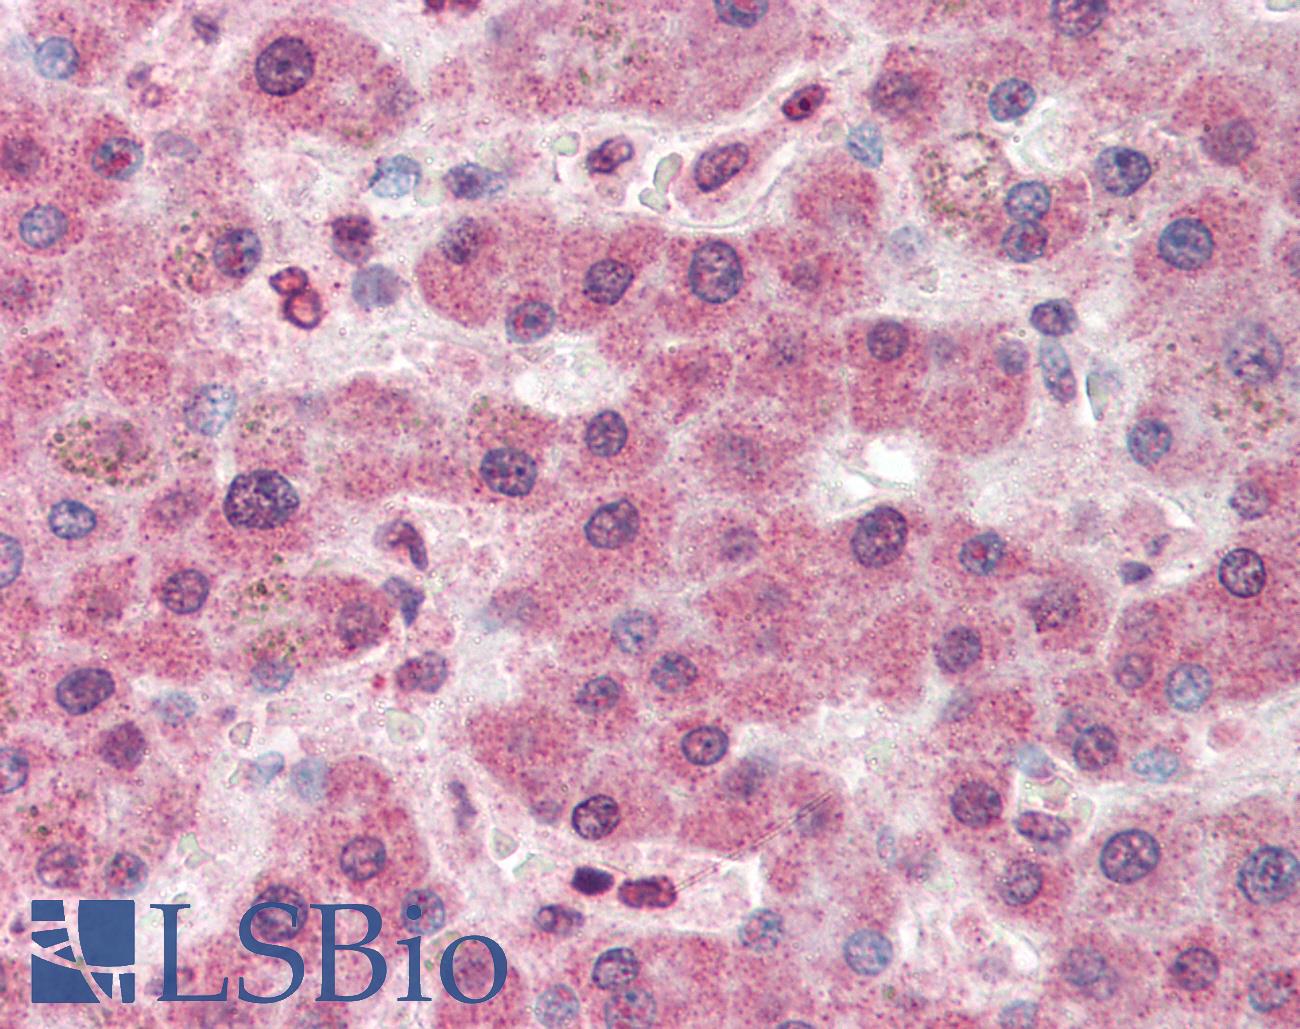 PC / Pyruvate Carboxylase Antibody - Anti-Pyruvate Carboxylase antibody IHC of human liver. Immunohistochemistry of formalin-fixed, paraffin-embedded tissue after heat-induced antigen retrieval. Antibody concentration 5 ug/ml.